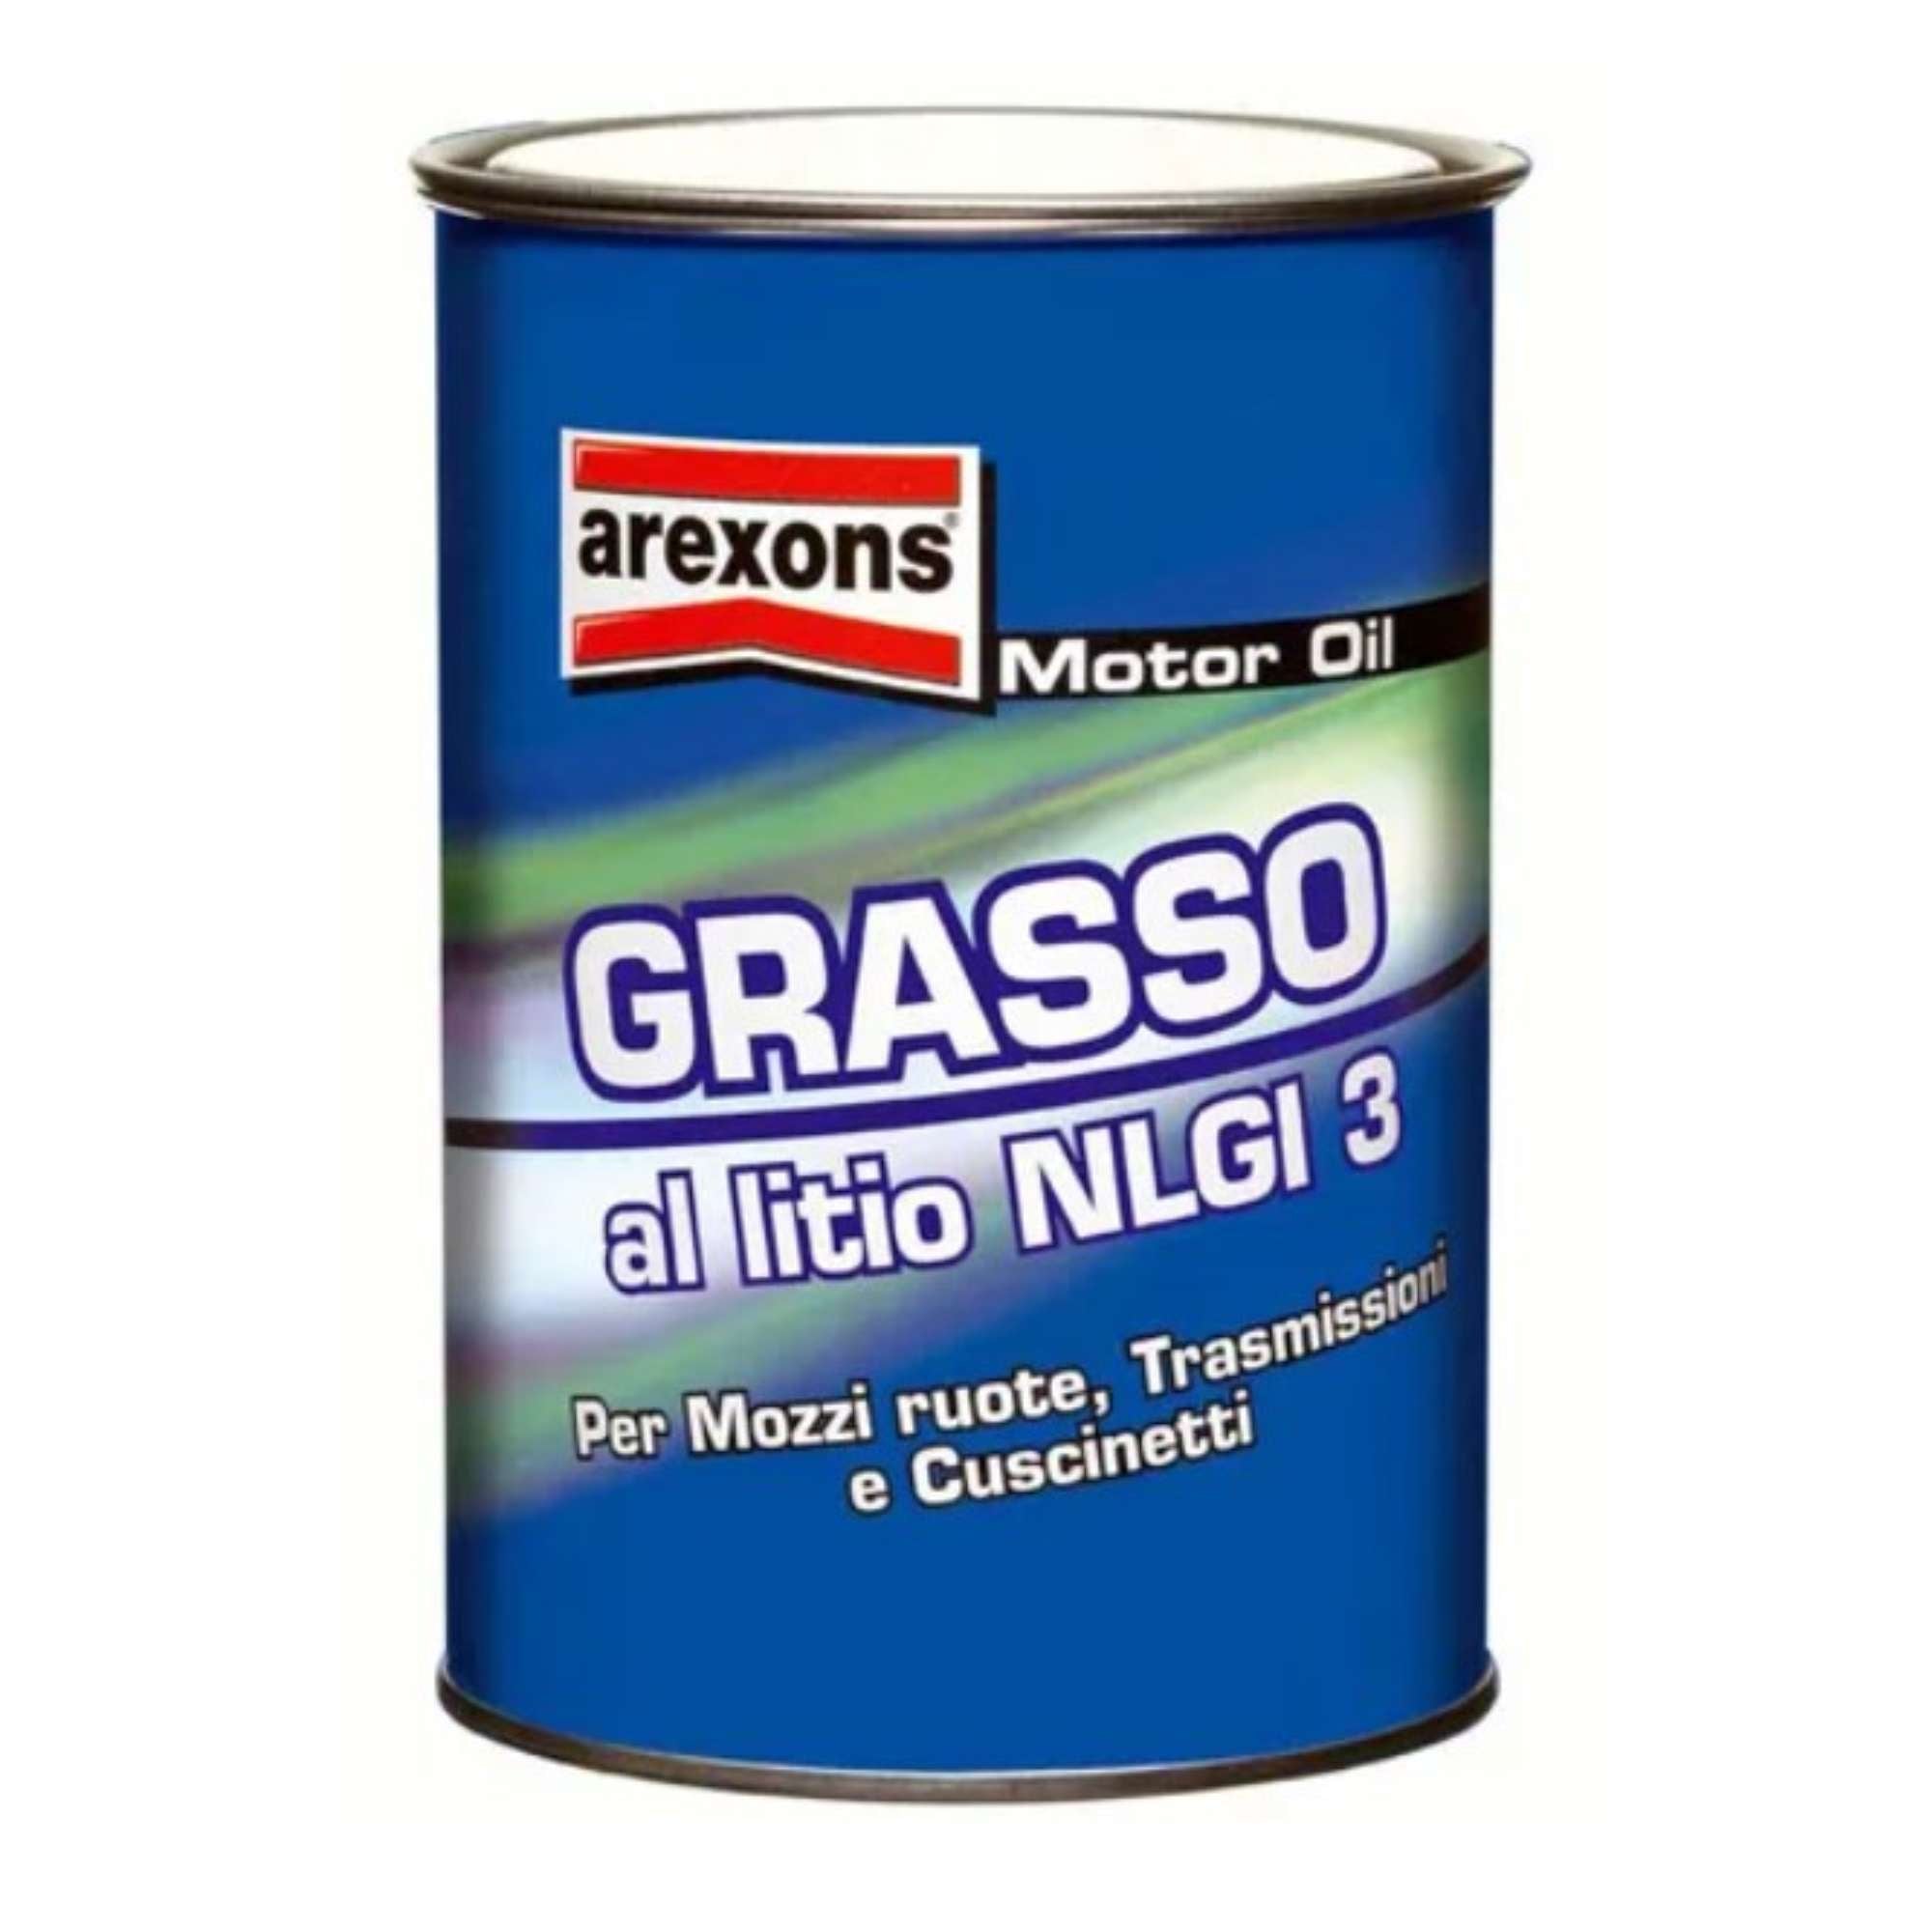 NLG2 Lithium Multipurpose Special Lubricating Grease 20Kg - Arexons 4259